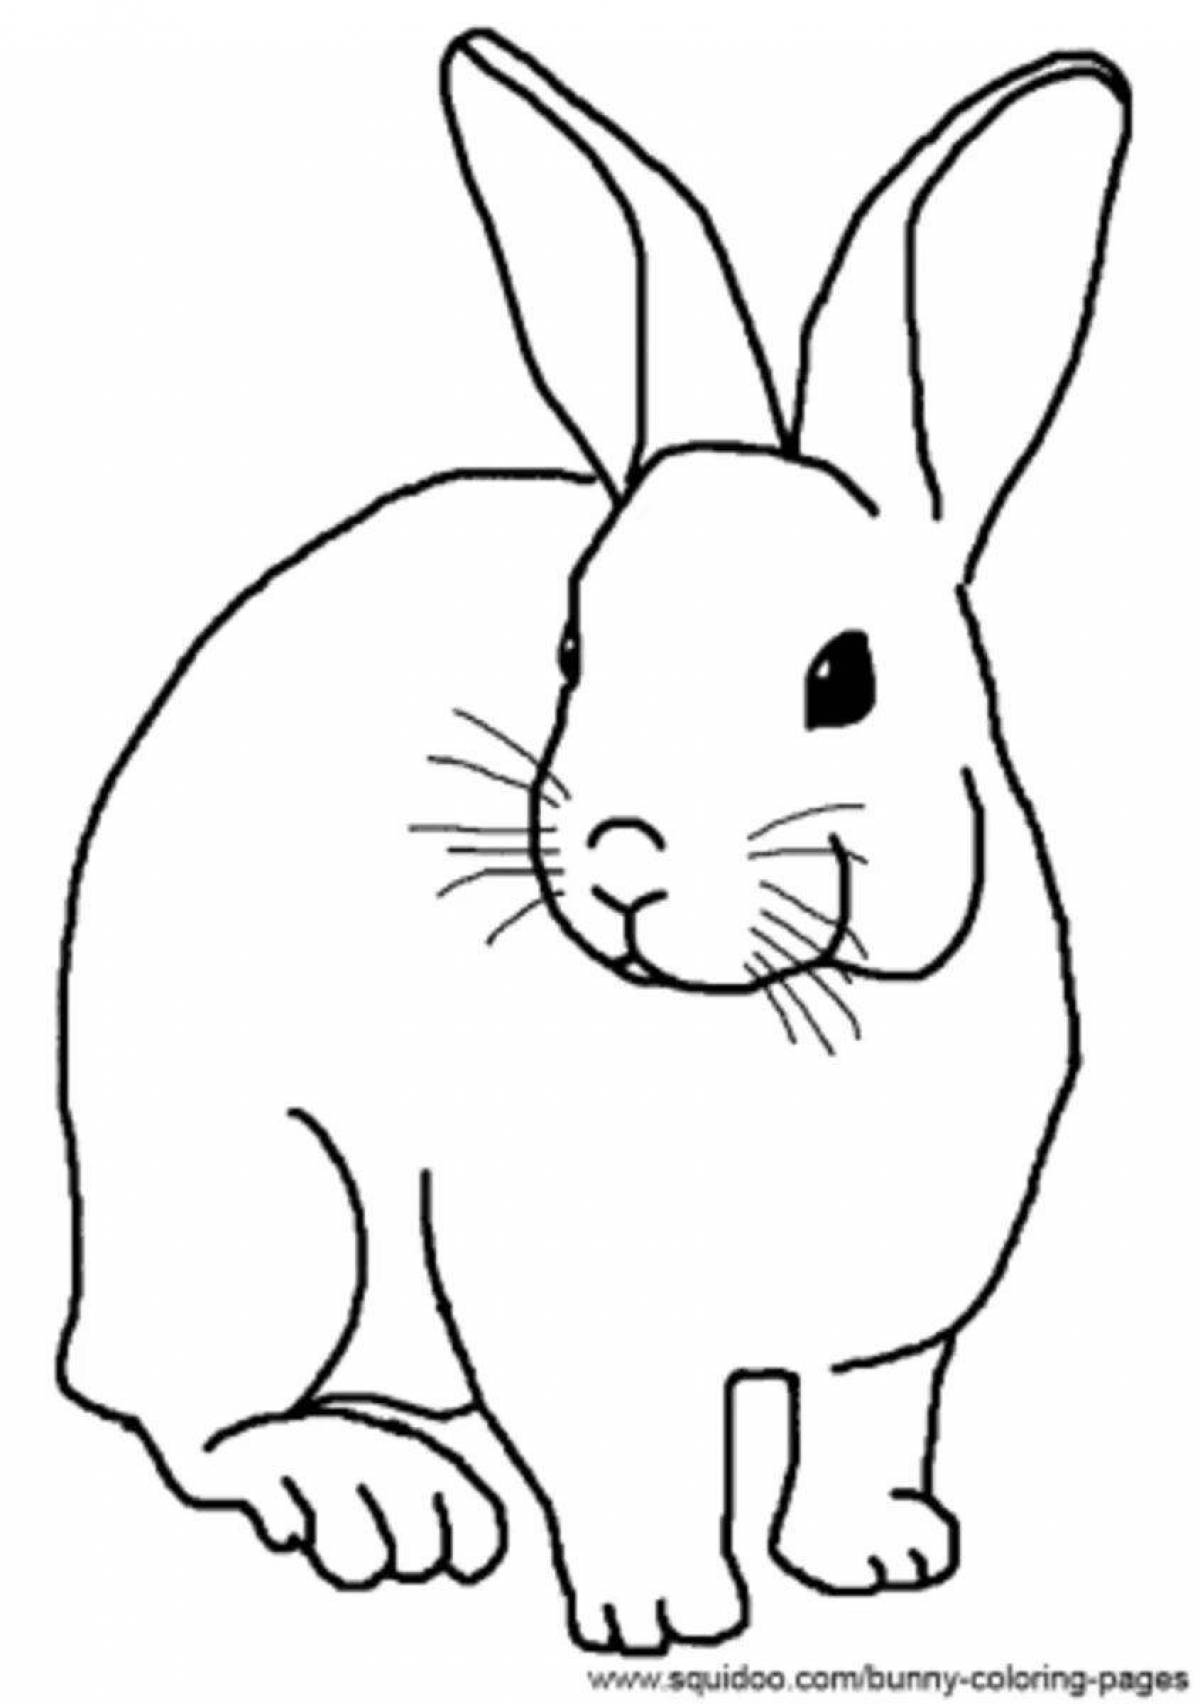 Grinning bunny coloring book for kids